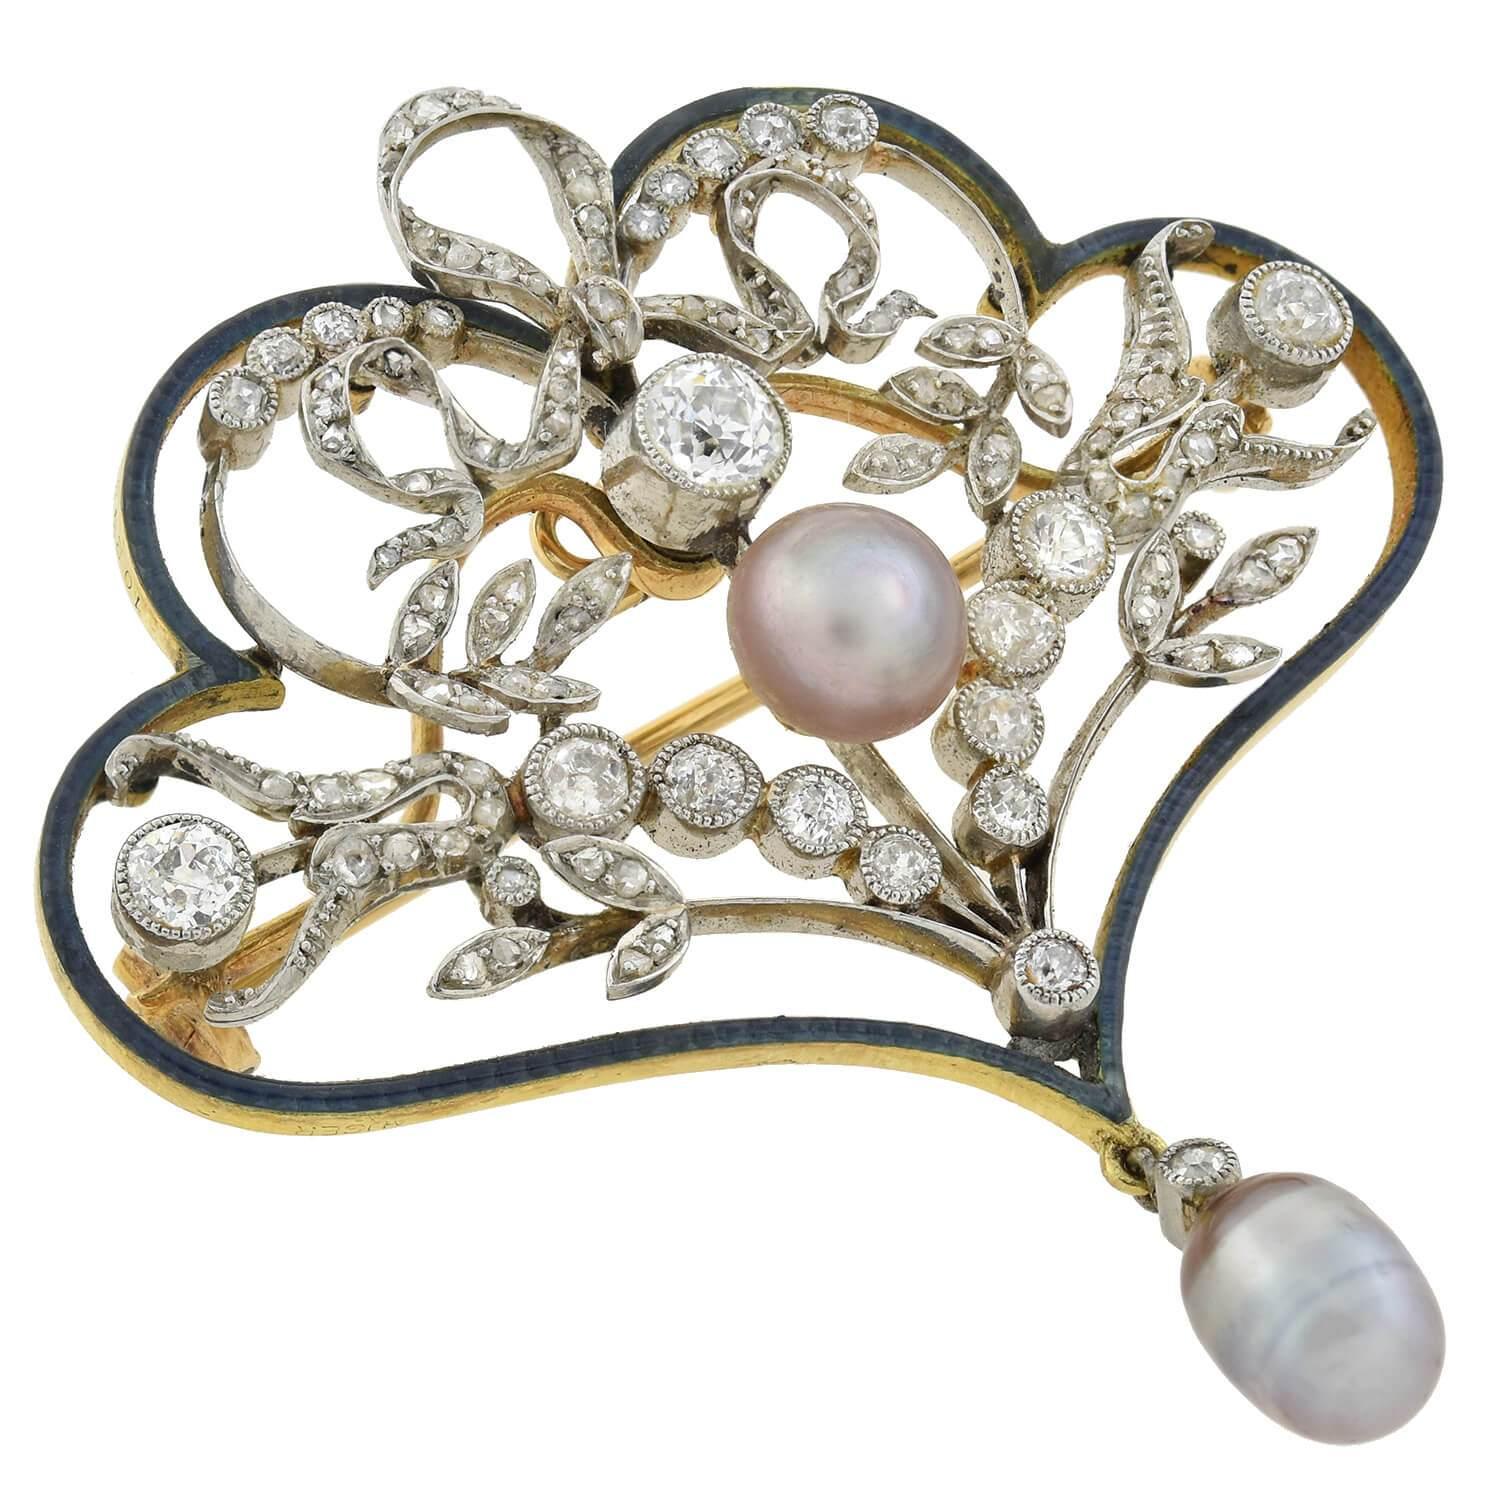 An exquisite diamond pin from the Edwardian (ca1910s) era! Crafted in 18kt yellow gold and platinum, this substantial piece displays a gorgeous foliate and ribbon design accented by sparkling diamonds, lustrous pearls and soft enameling. Old Rose